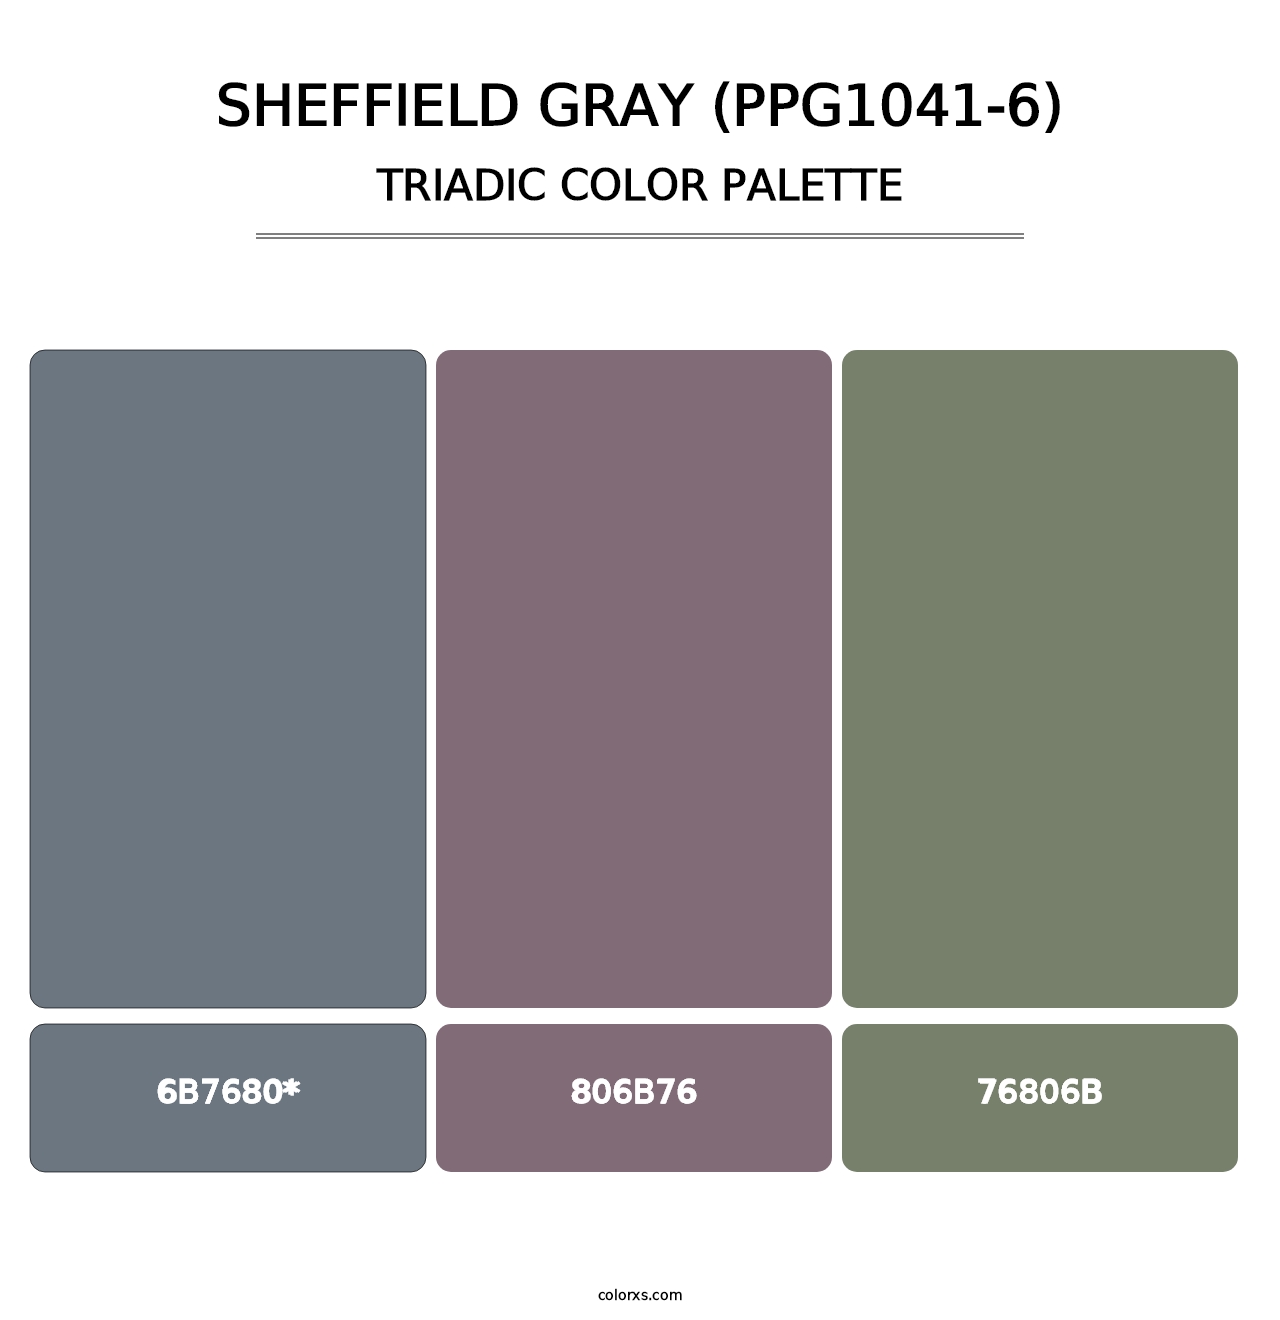 Sheffield Gray (PPG1041-6) - Triadic Color Palette